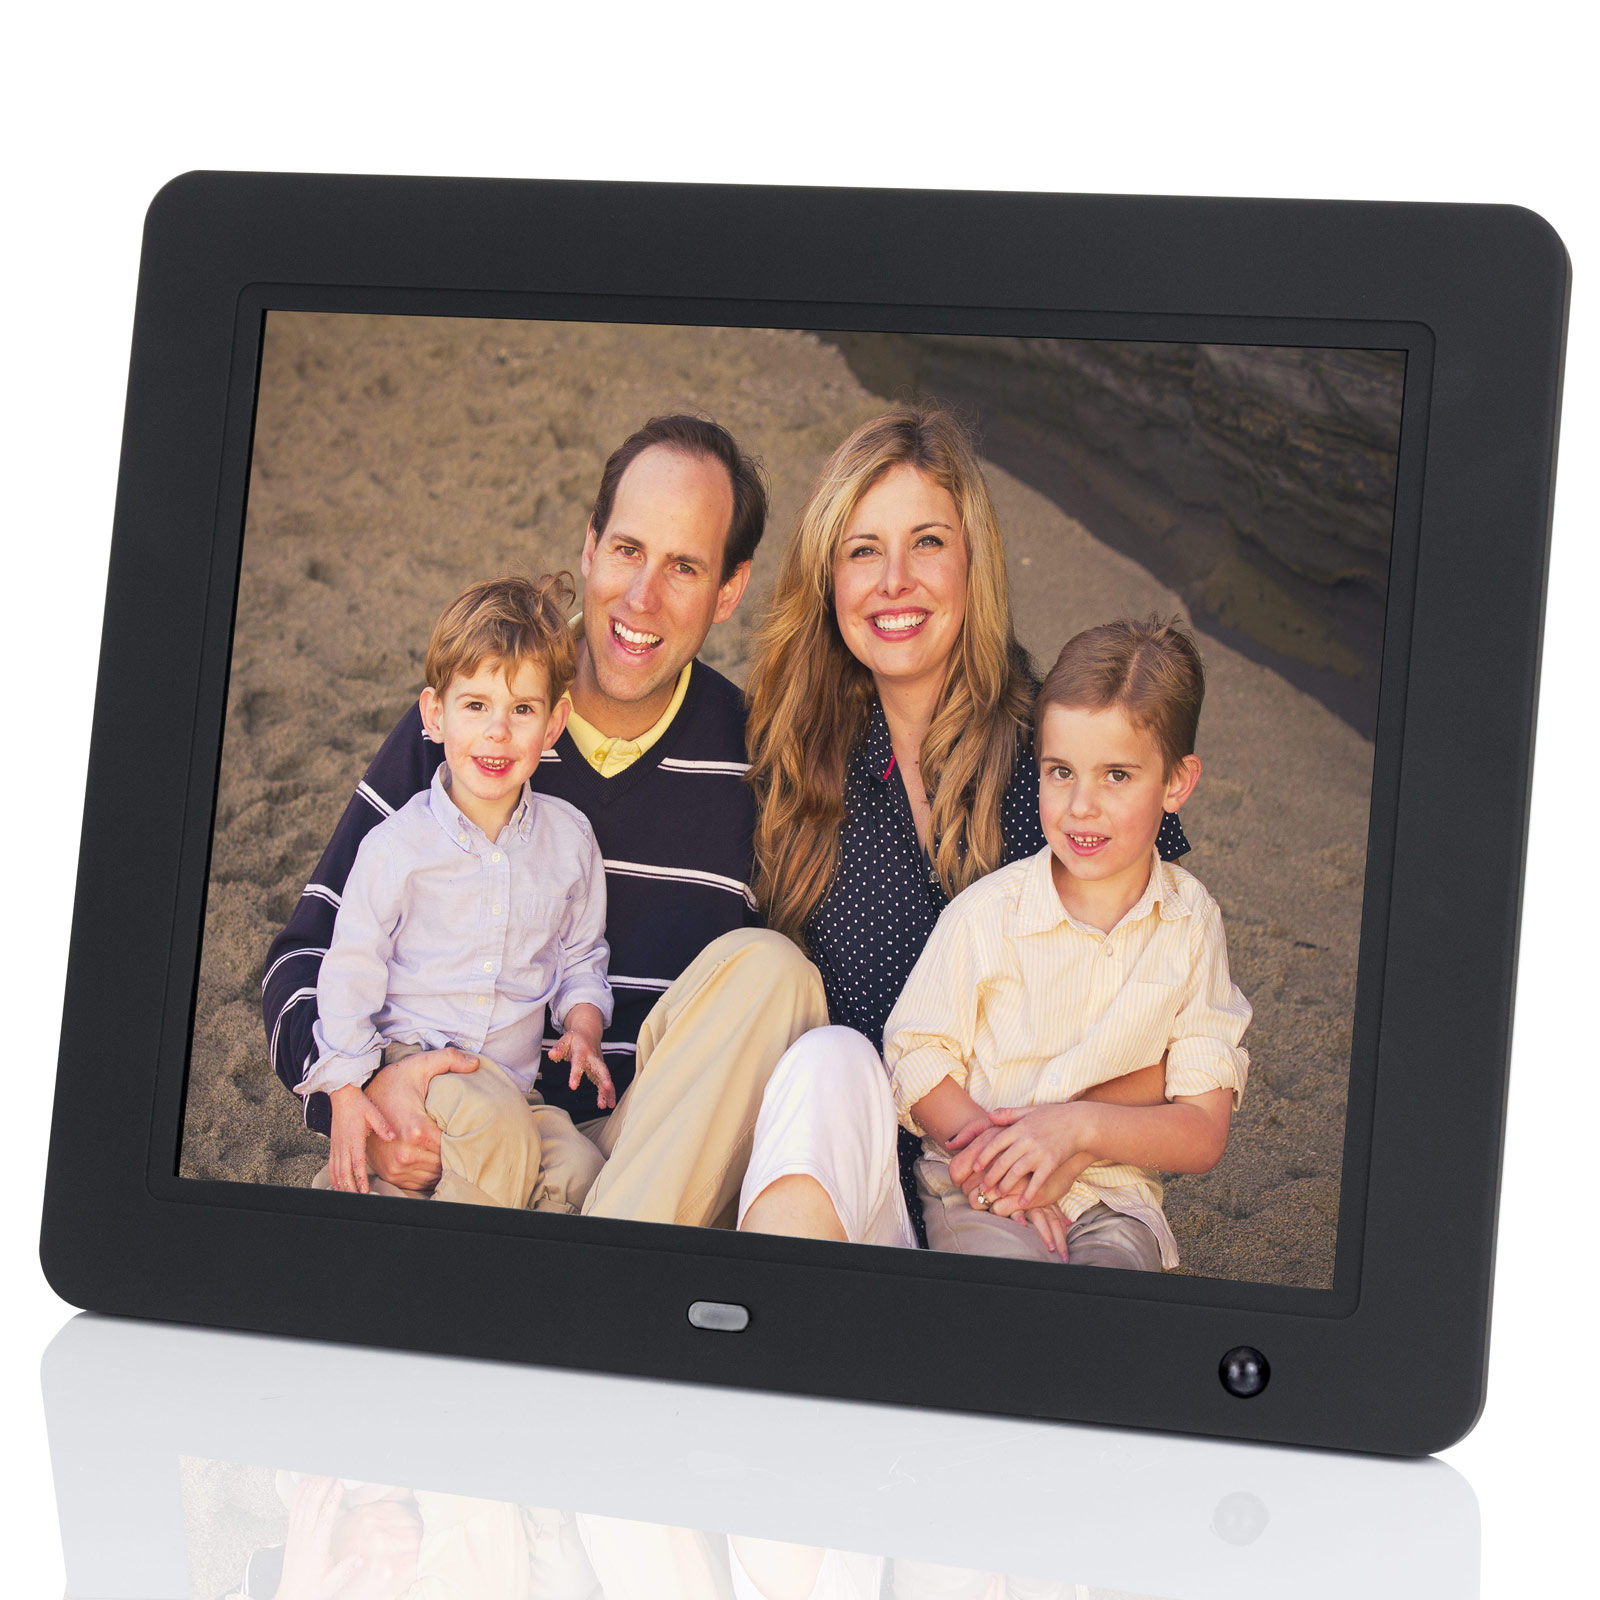 12.1 inch Hi-Resolution Digital Picture Frame with Motion Sensor & 4GB Built-in Memory